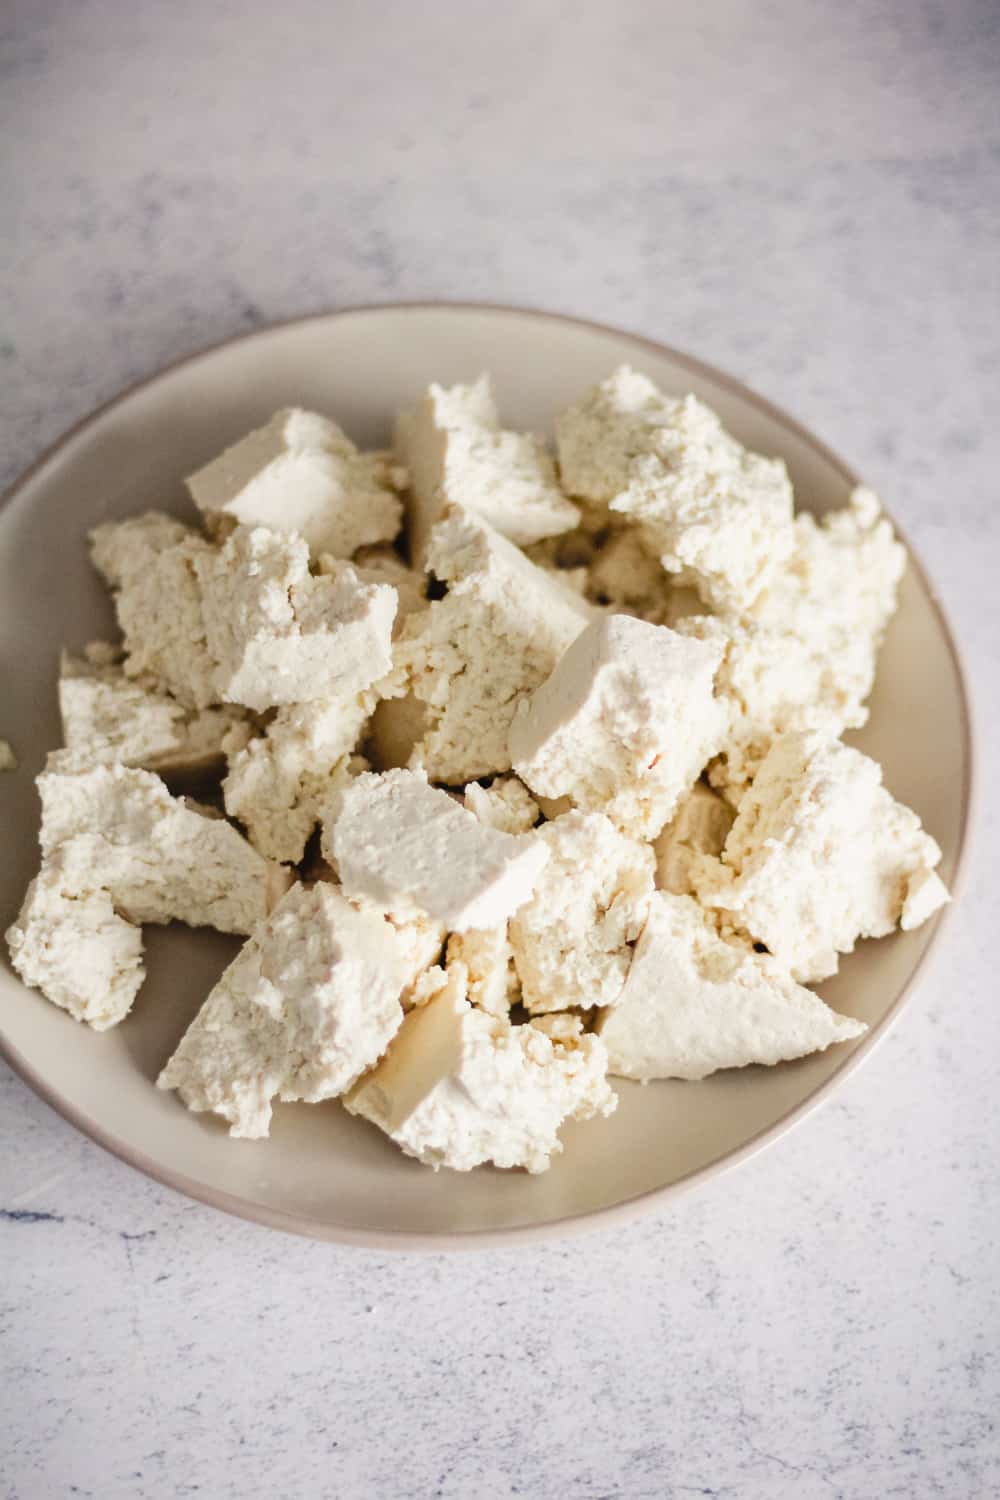 Tofu torn into small pieces on a plate.